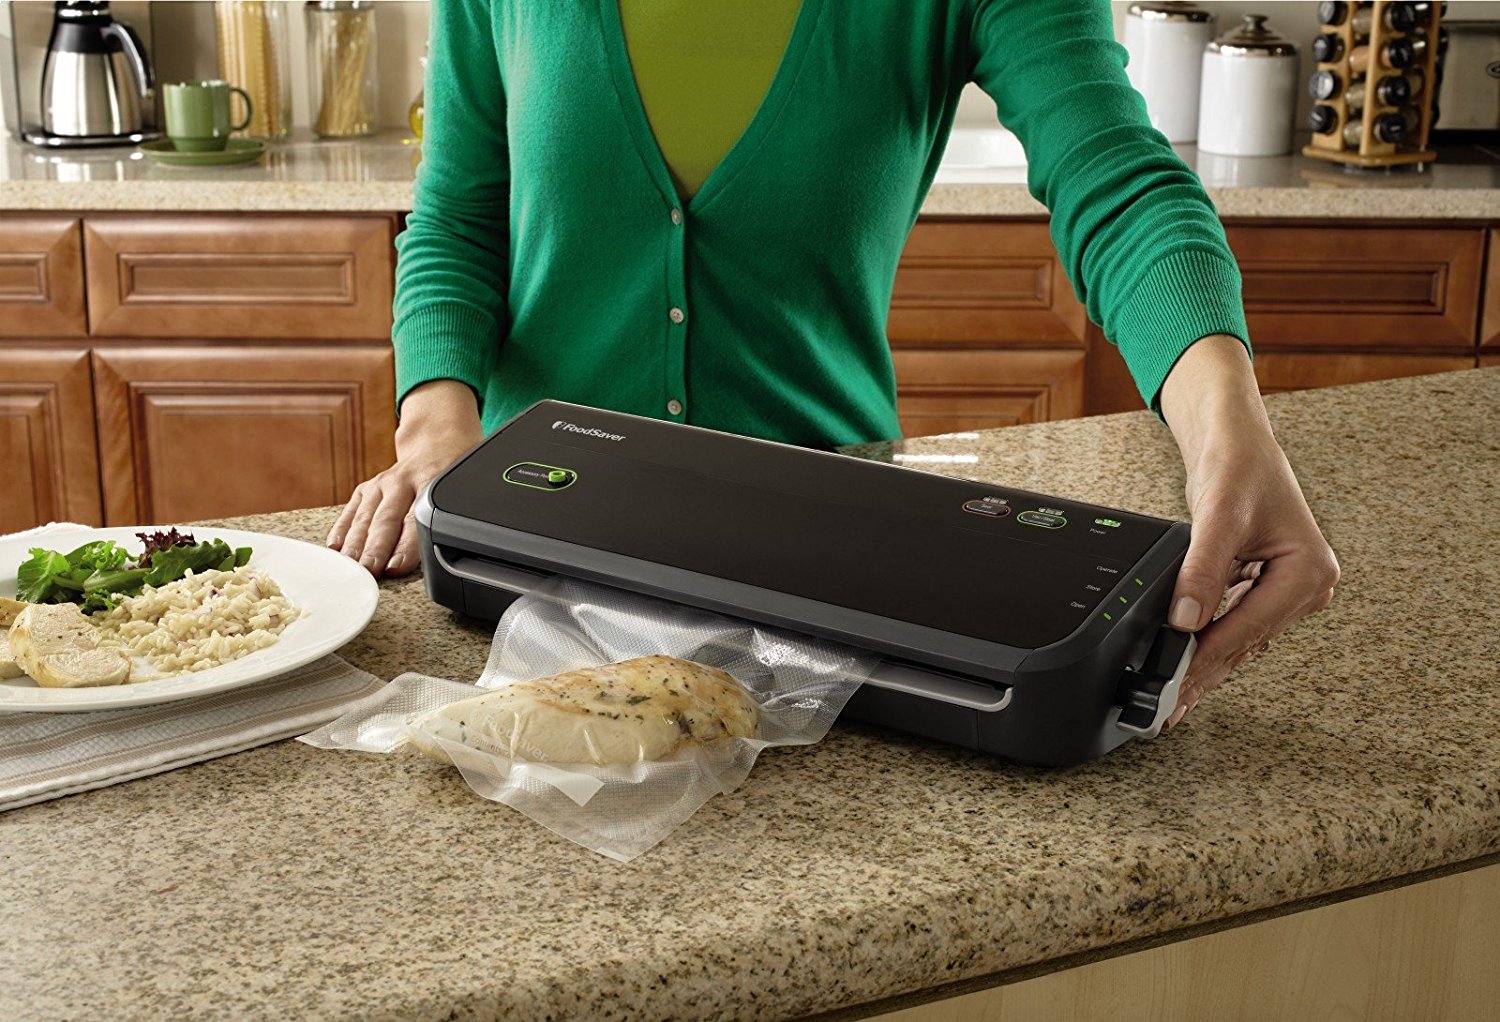 Today only: FoodSaver FM2000 with starter kit for $29 shipped (refurbished)